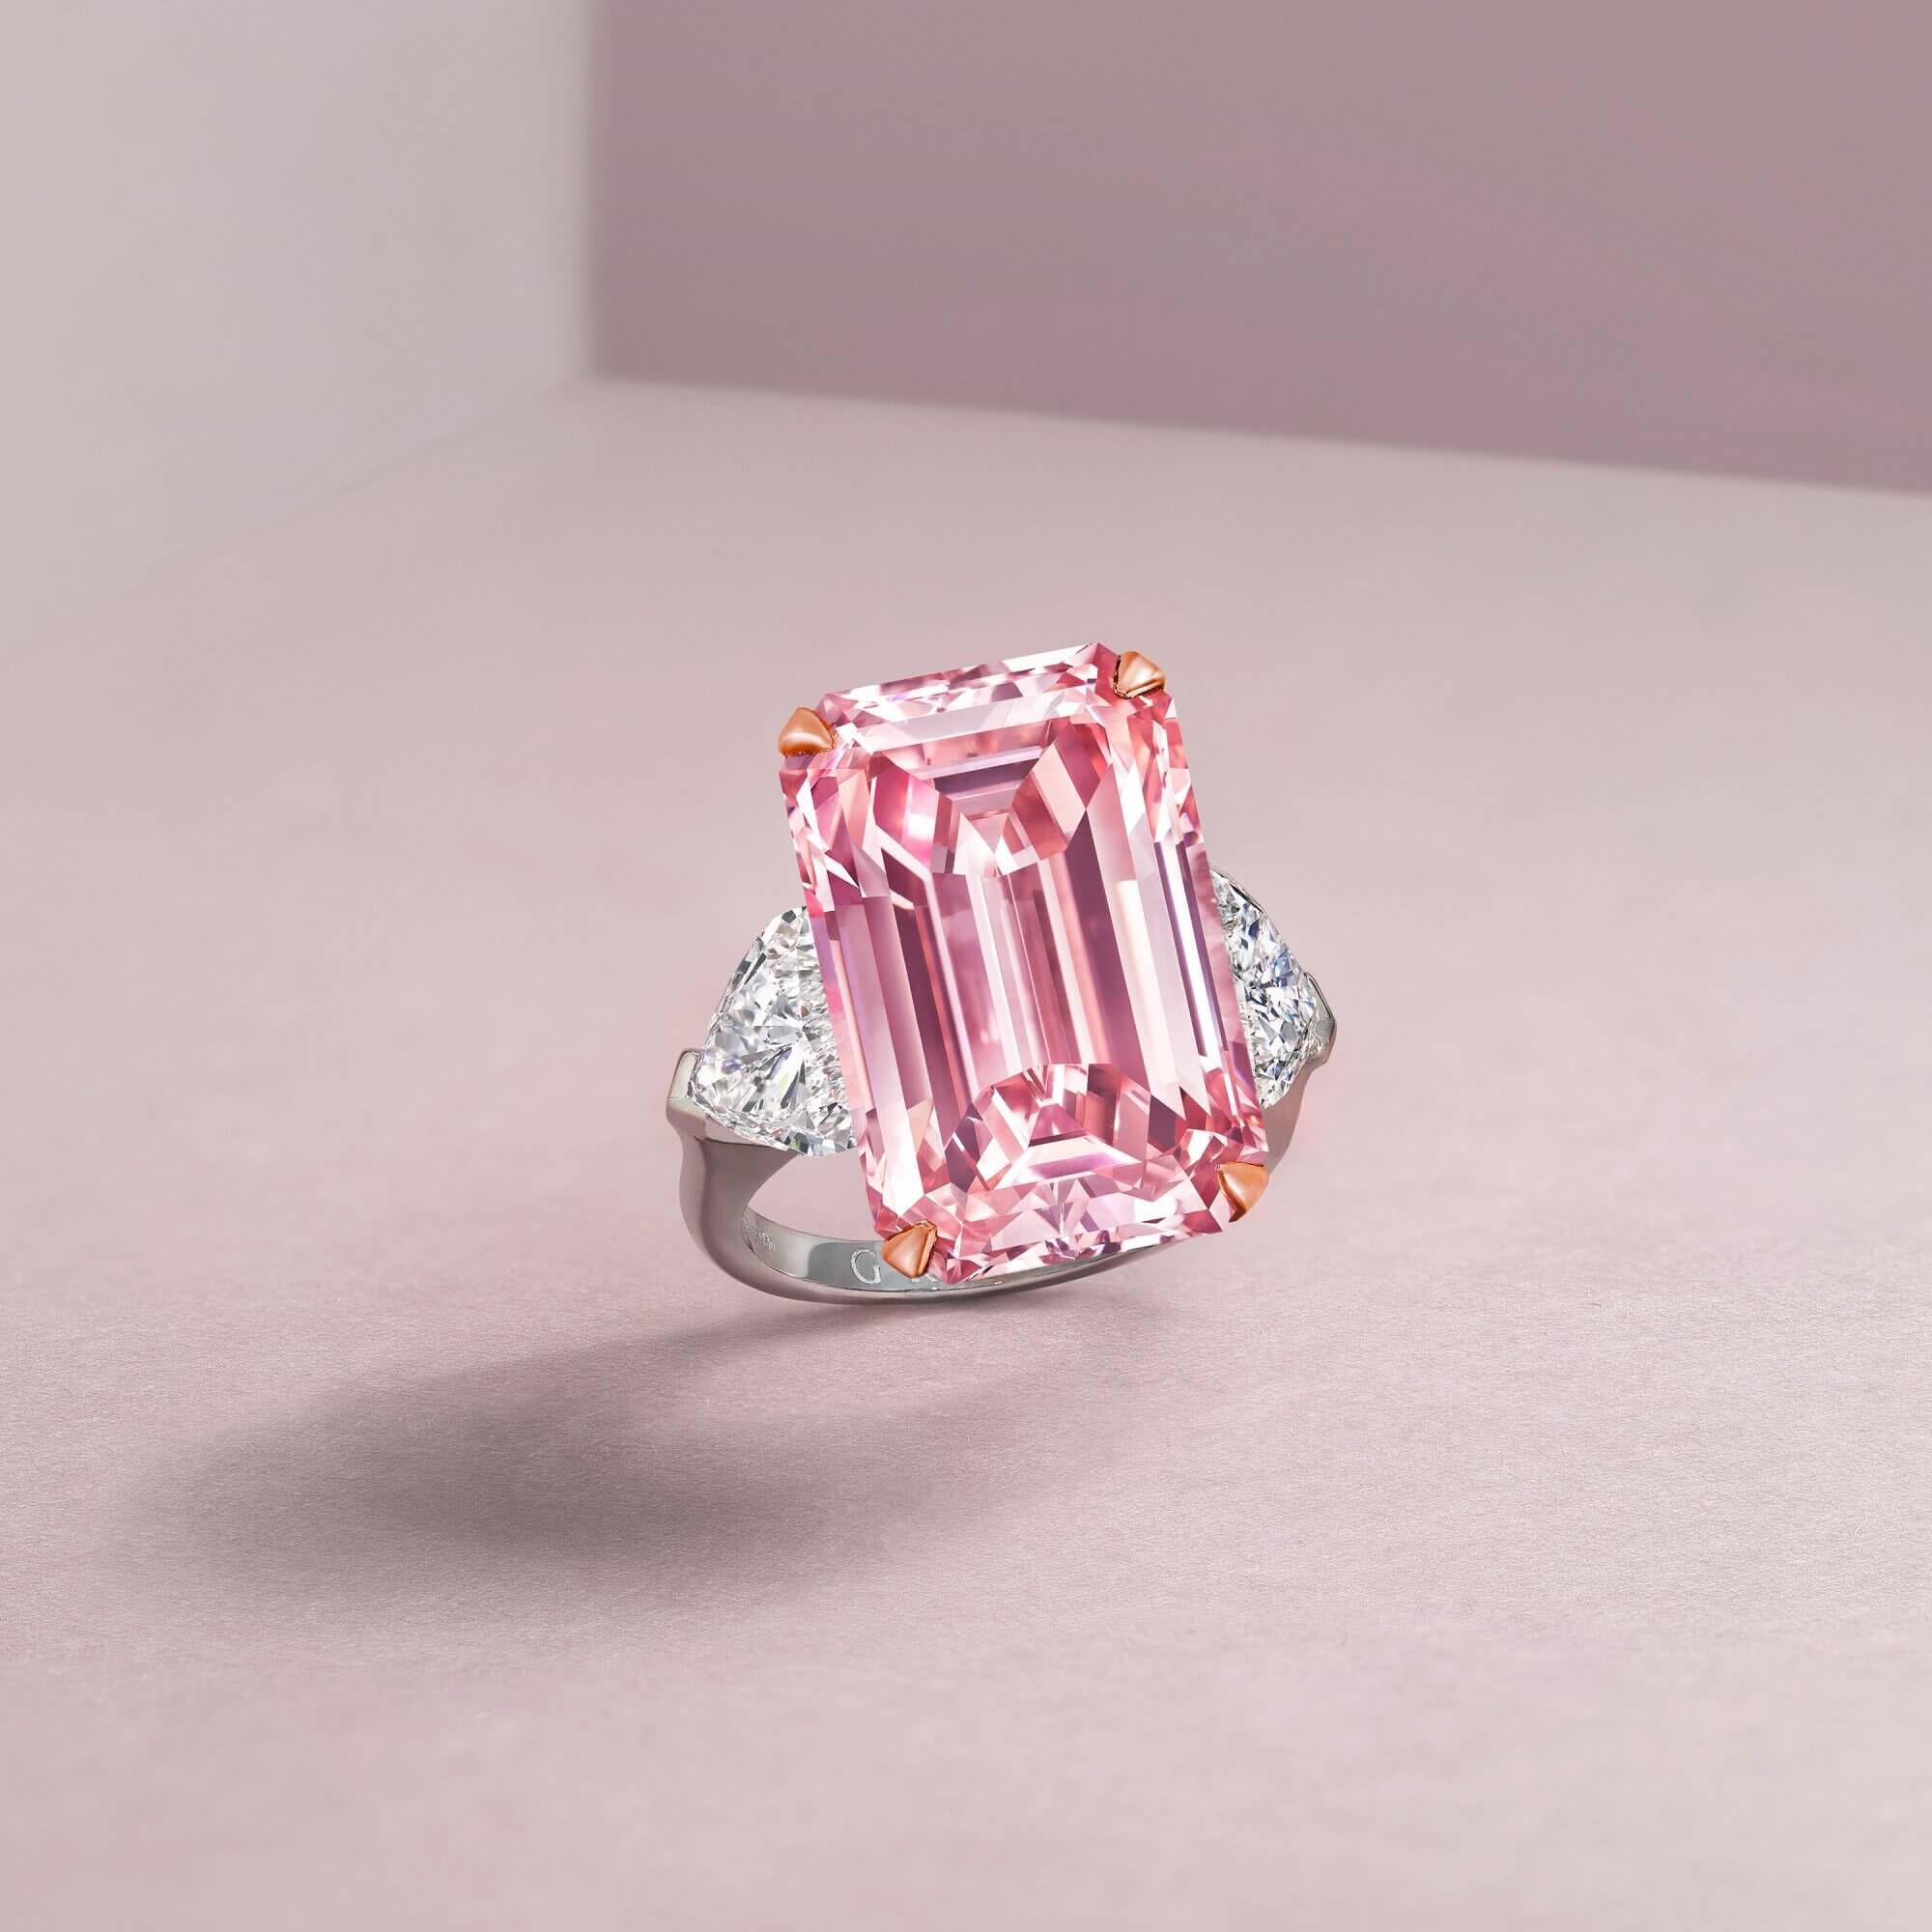 This important diamond ring features an exquisite 16.88 carat Fancy Intense Pink Internally Flawless emerald cut diamond